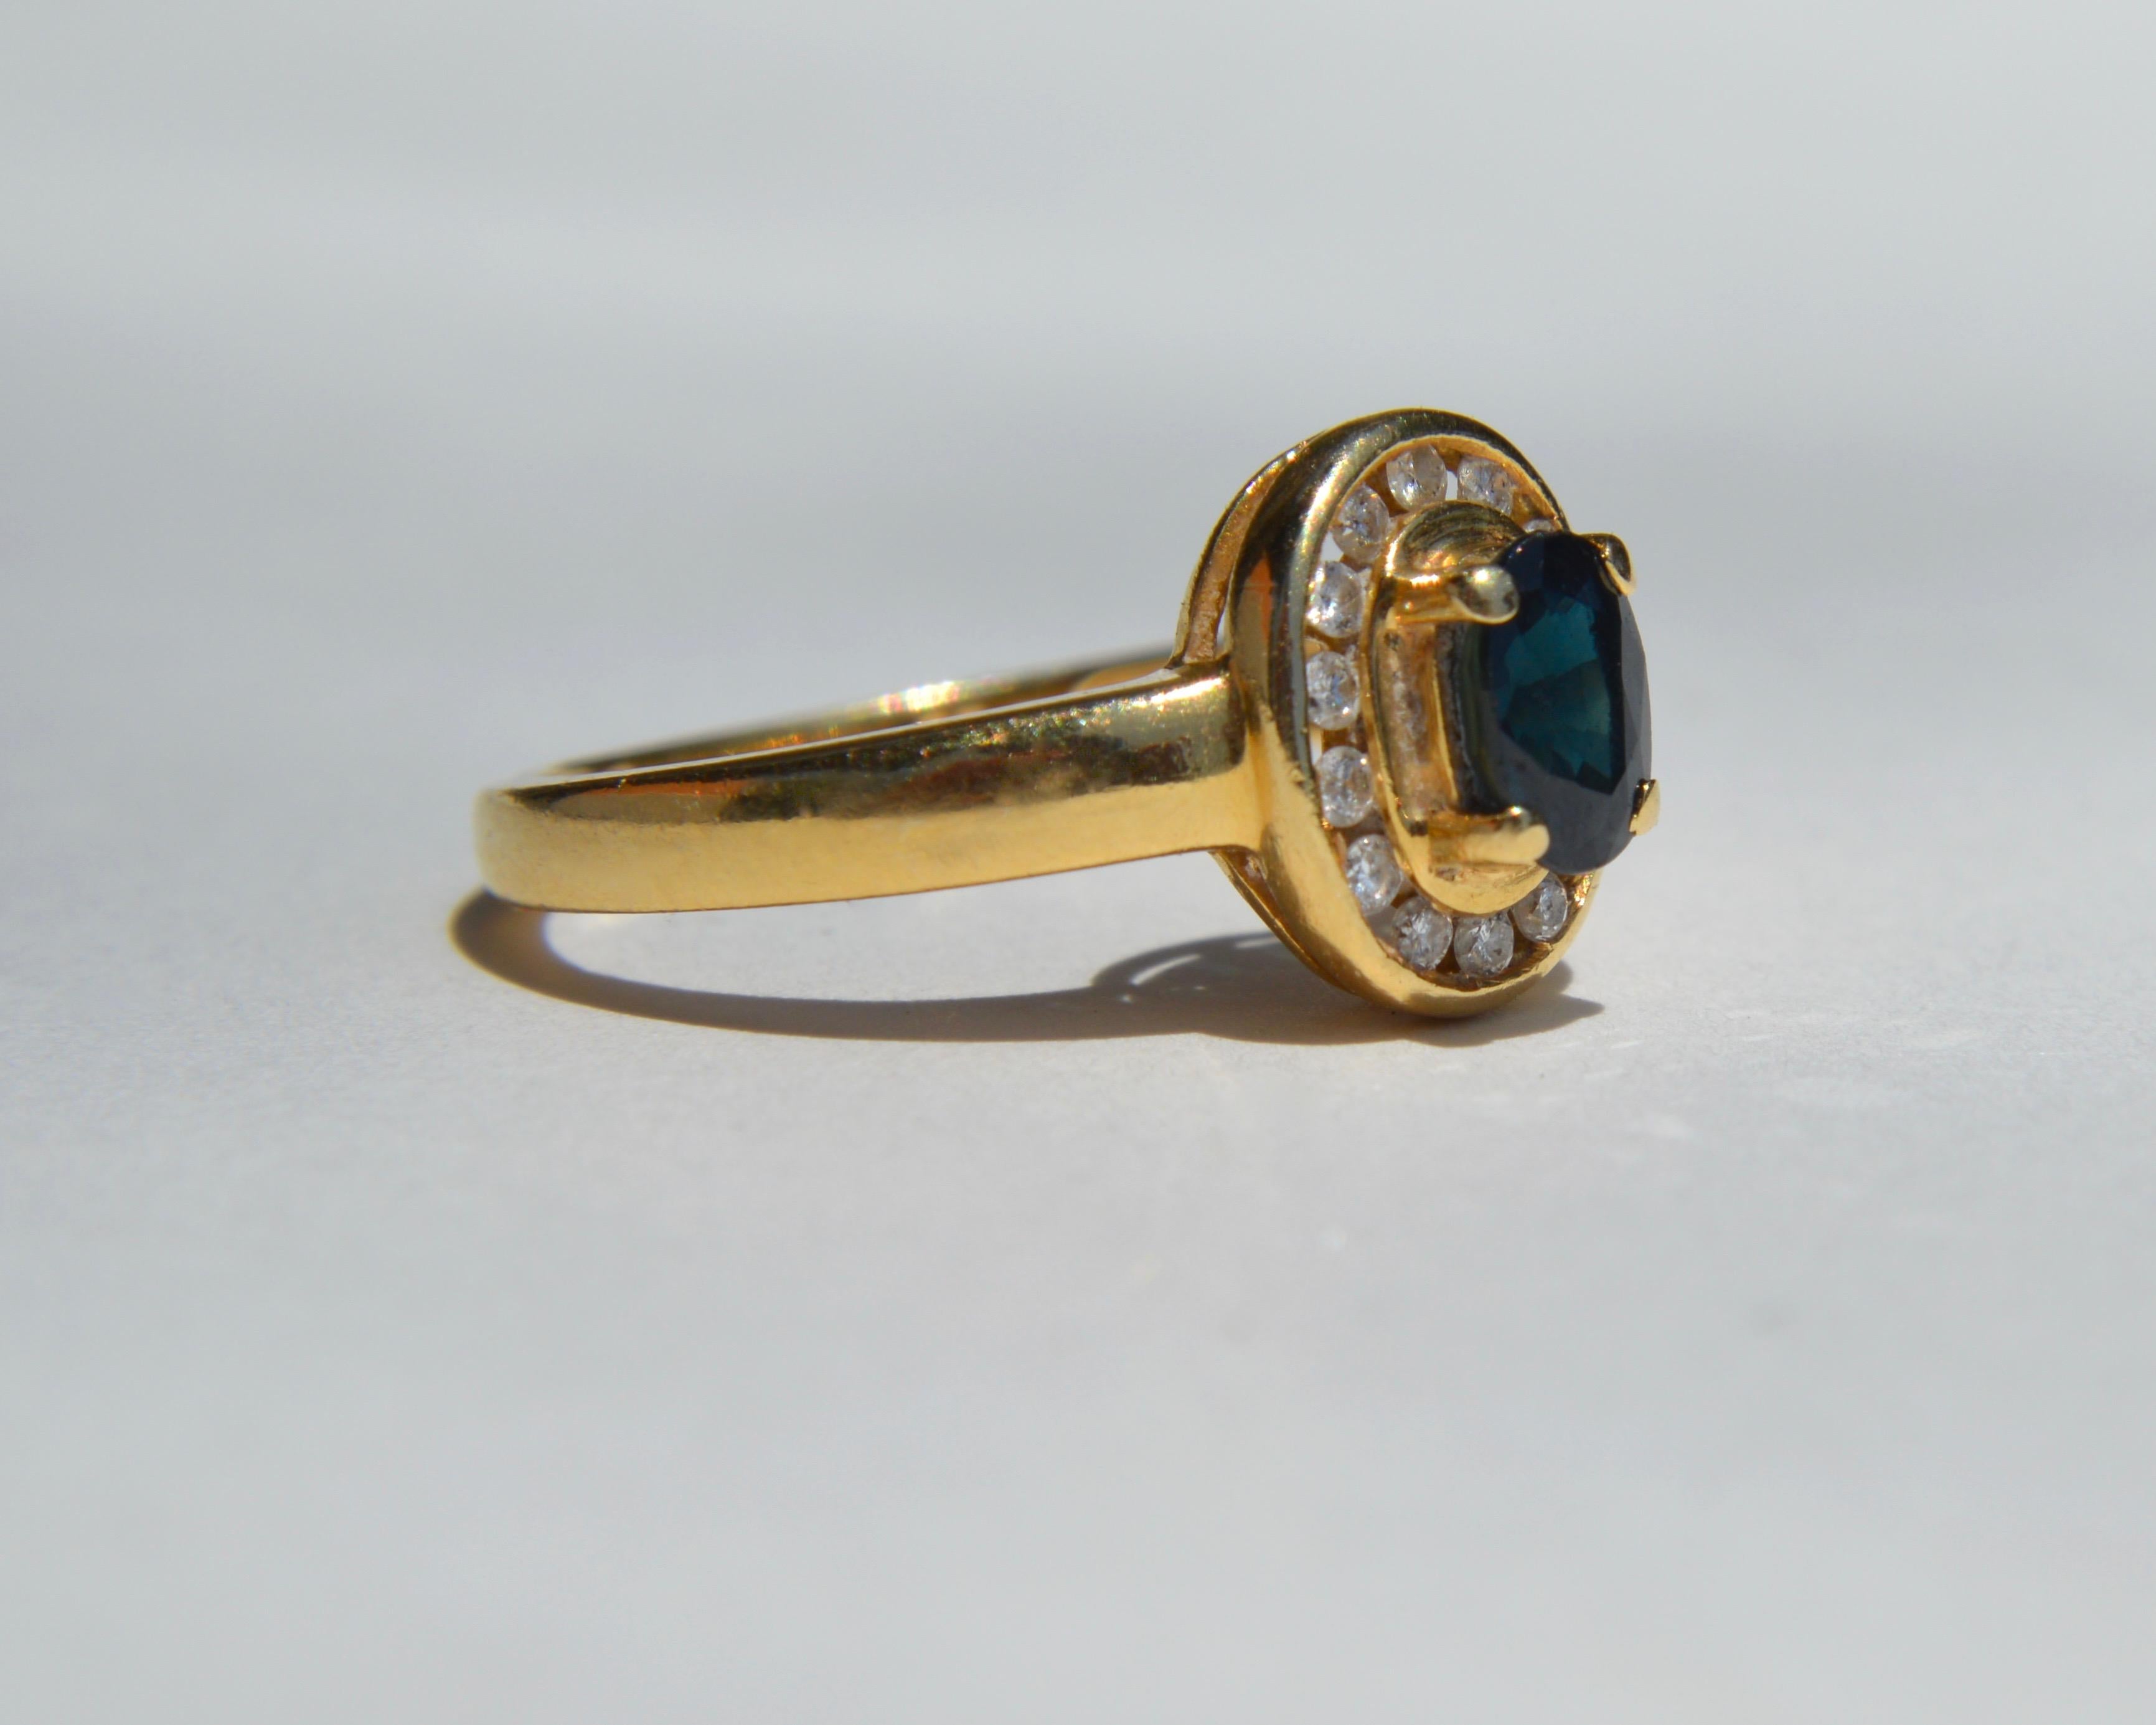 Beautiful midcentury era circa 1960s 14K yellow gold .35 carat natural oval cut unheated sapphire and diamond halo ring. 13 total round cut diamonds, each .015 carats (1.5mm). Diamond color F, clarity VS1. Size 6.75, can be resized by a jeweler.